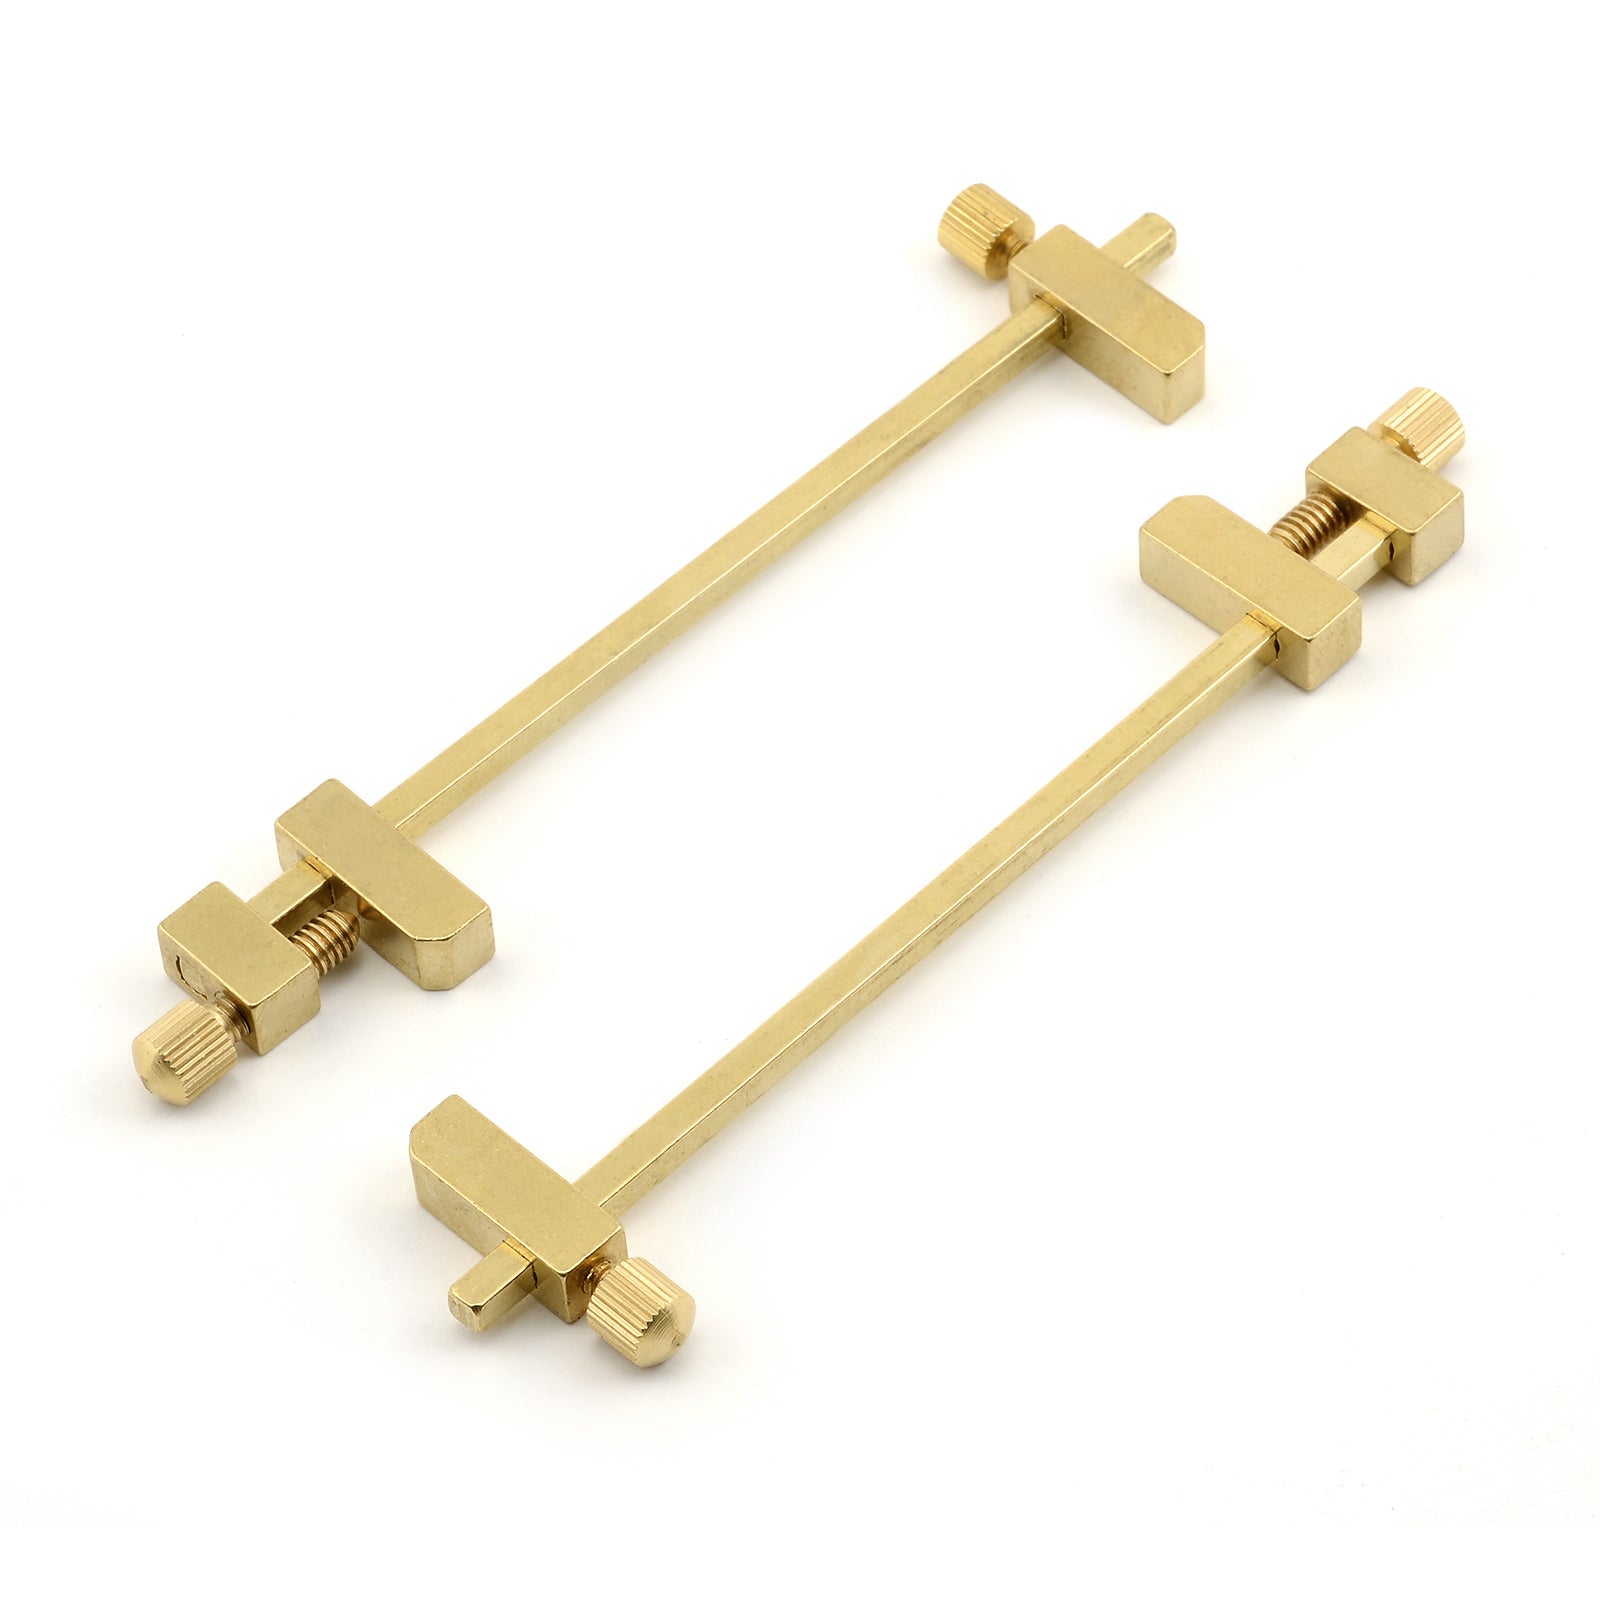 Solid Brass Miniature Bar Clamps, 3 - 3/4 Inches Long (Set of 2)